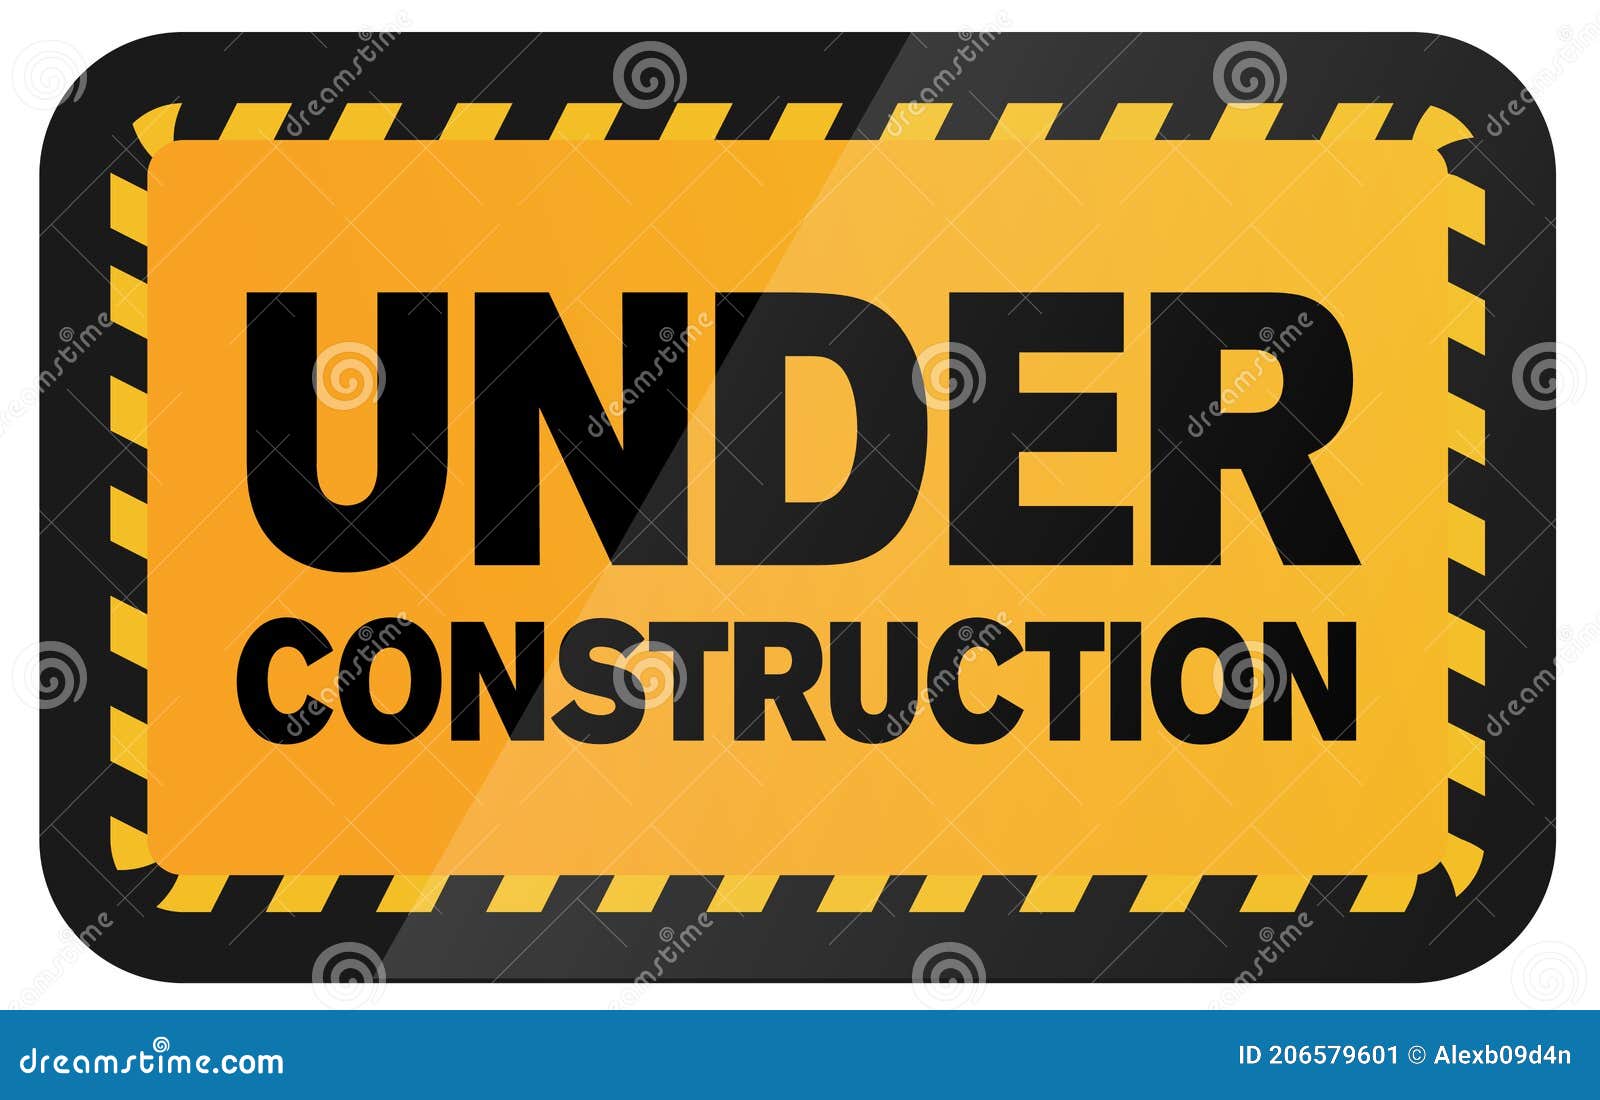 Under Construction Sign stock vector. Illustration of abstract - 206579601